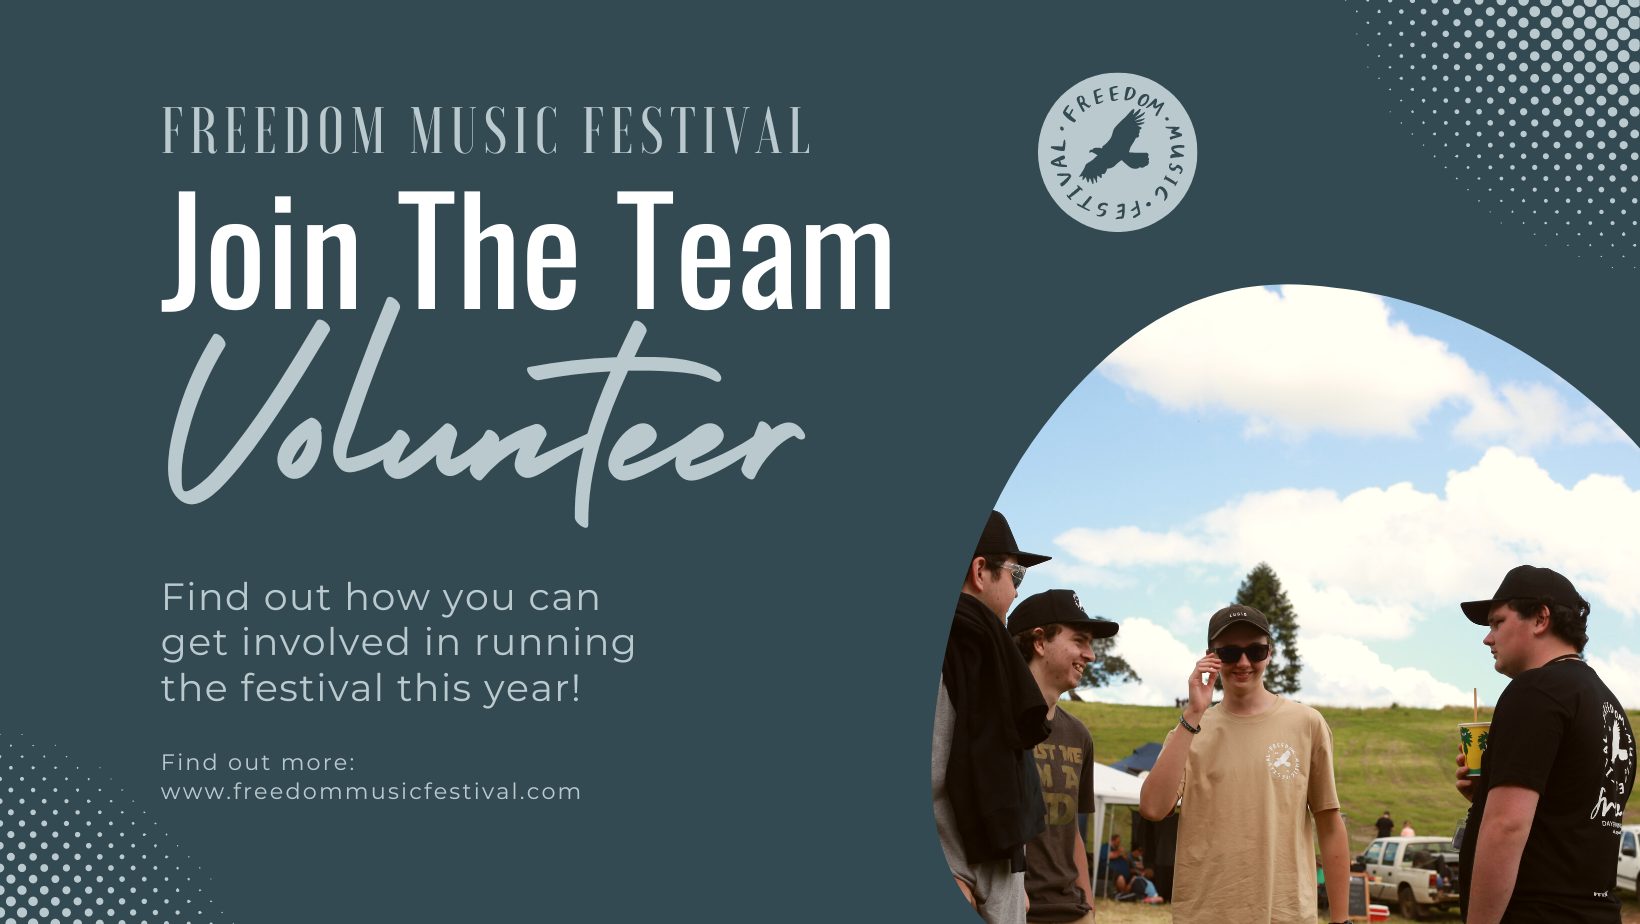 Join The Team Freedom Music Festival